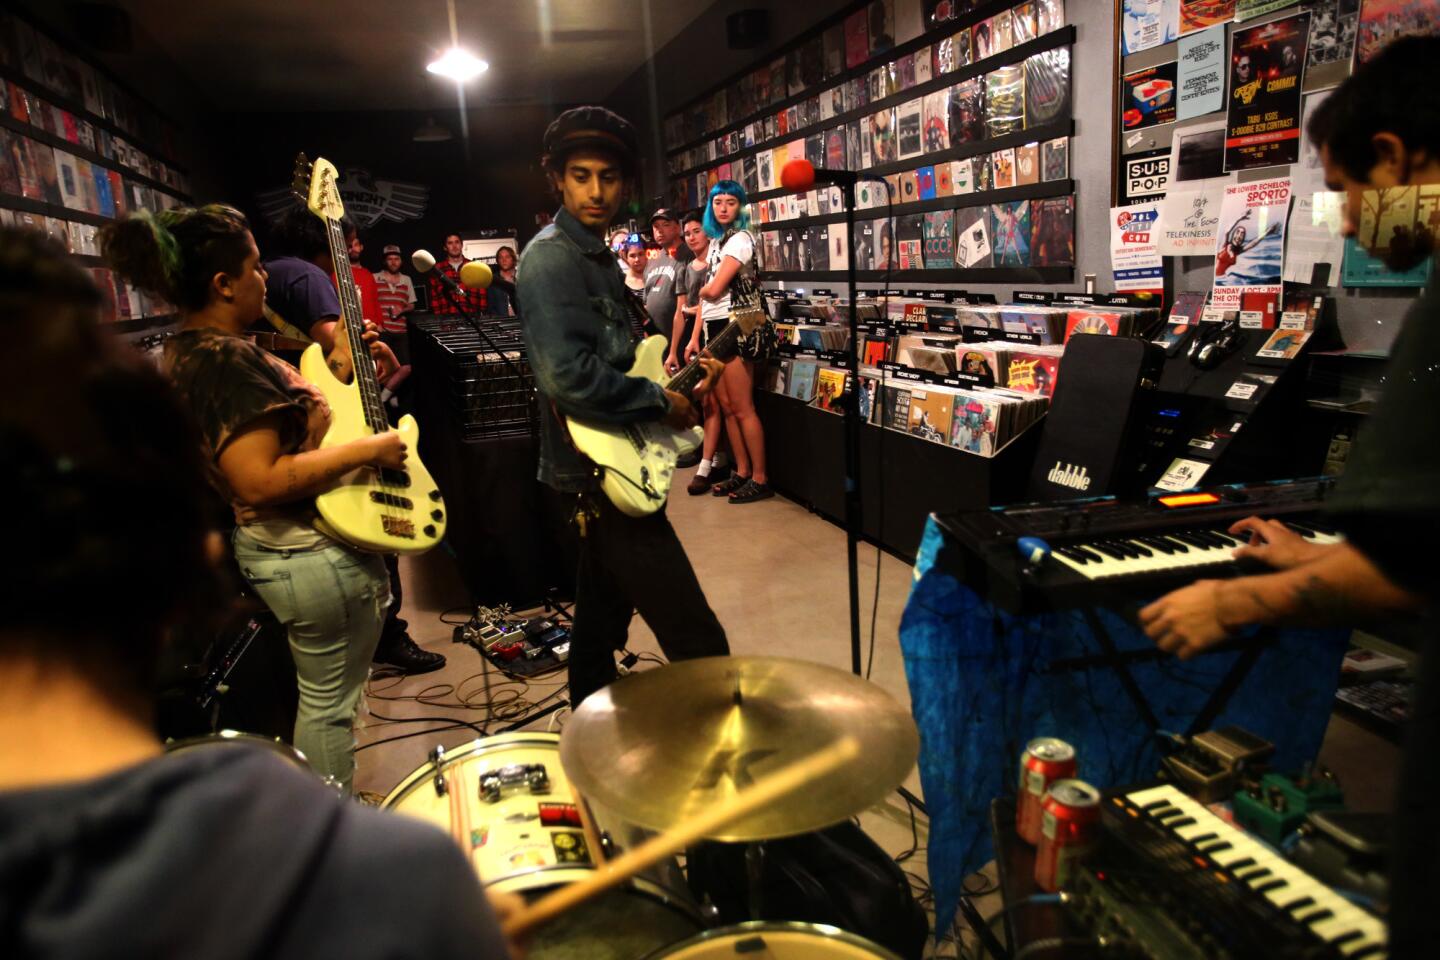 The Southern California band Dabble performs inside Permanent Records on York Avenue in Highland Park.